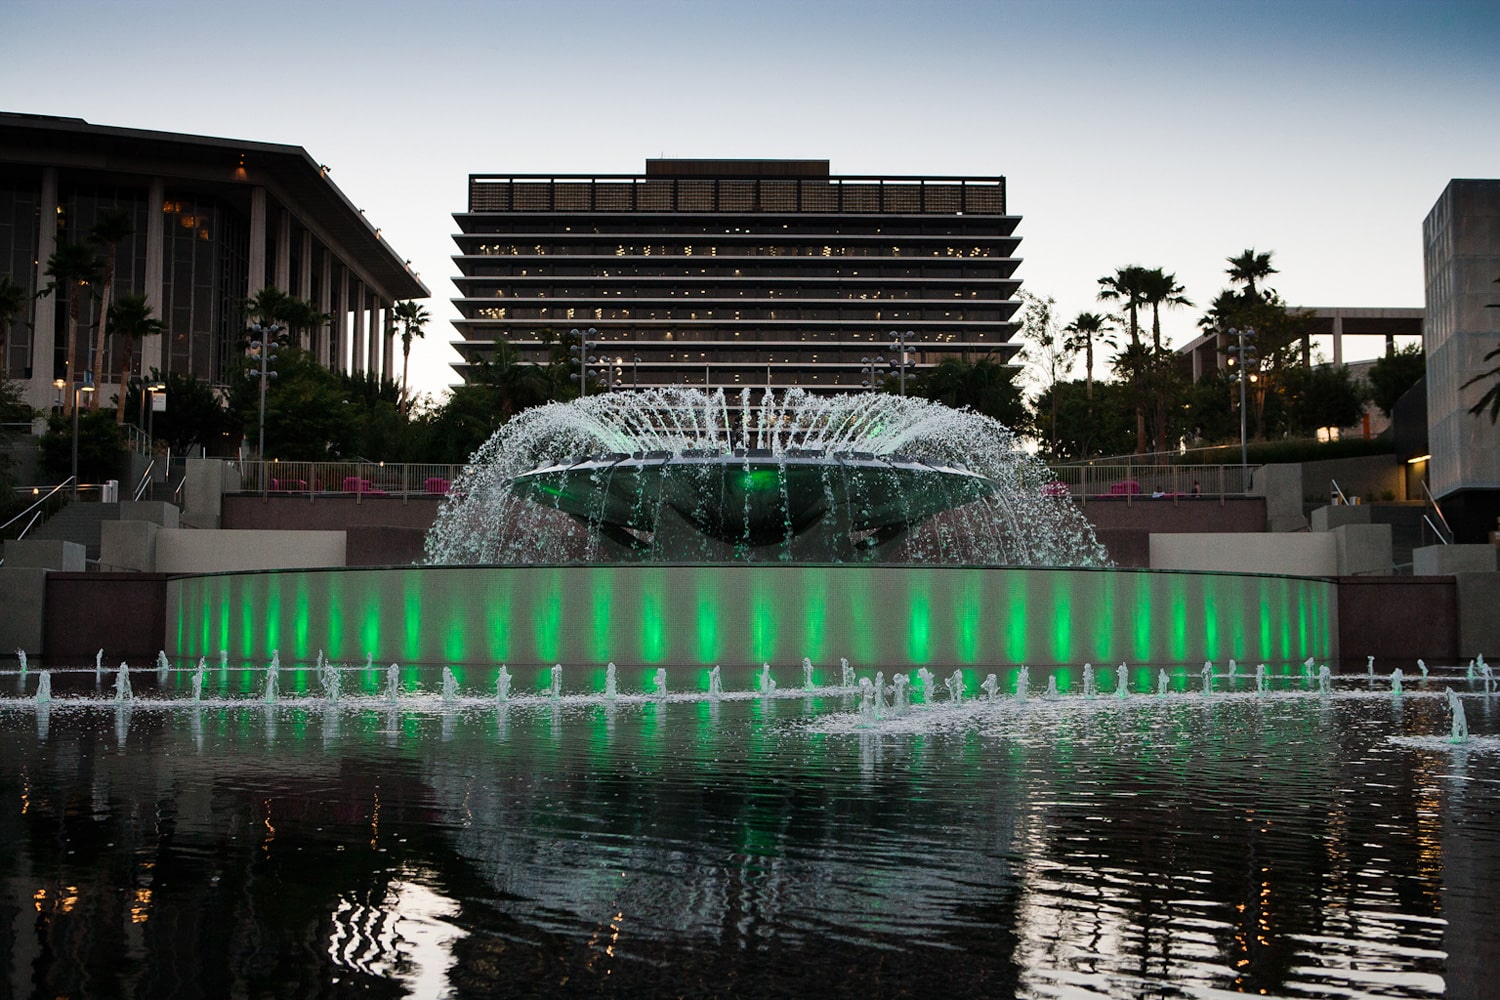 Image of water fountains with green lights and buildings in view